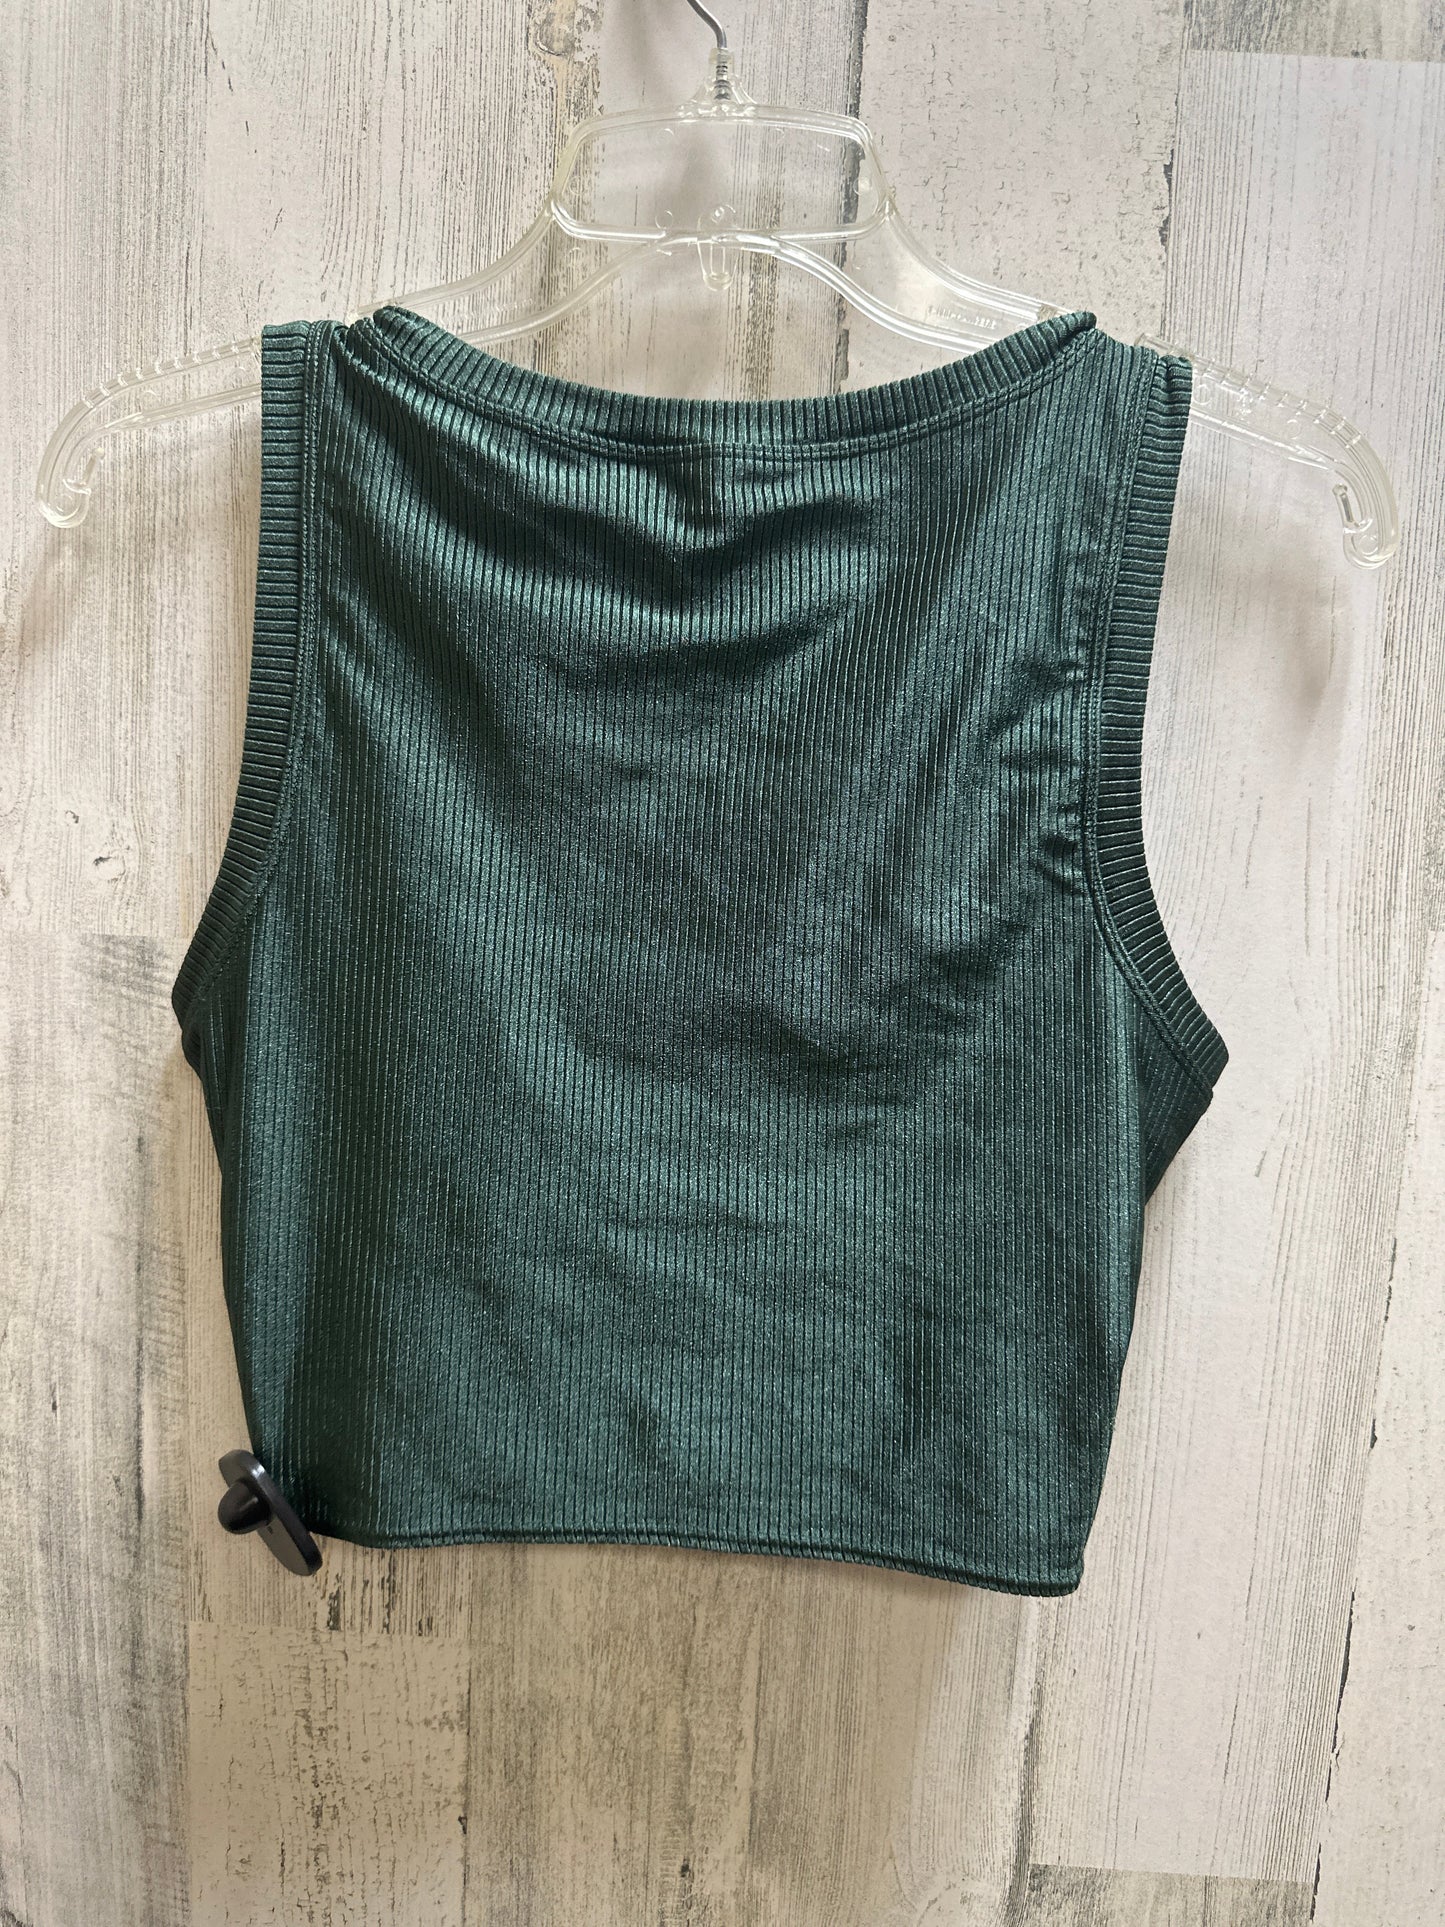 Green Athletic Tank Top Aerie, Size Xl